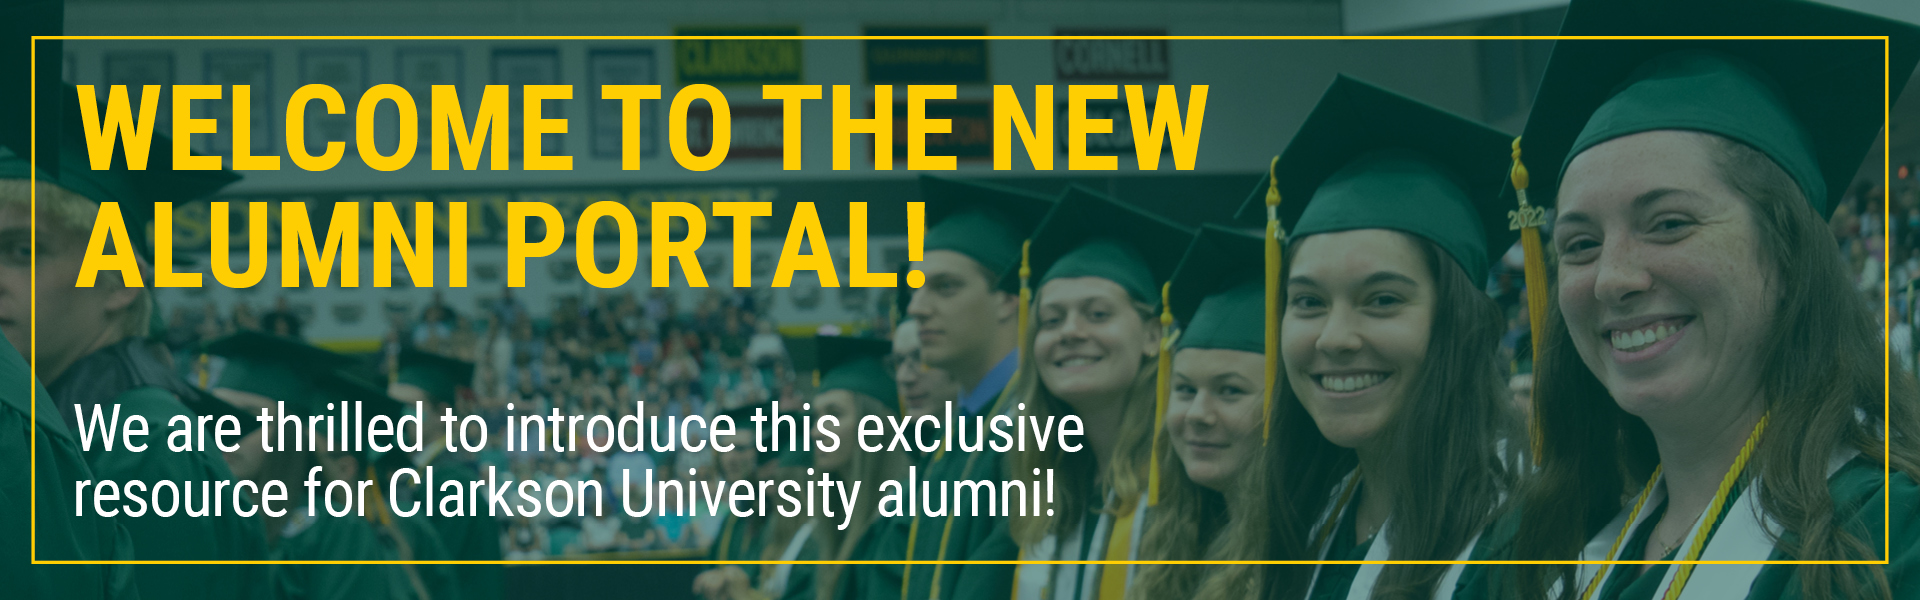 Welcome to the new Alumni portal. We are thrilled to introduce this exclusive resource for Clarkson University Alumni